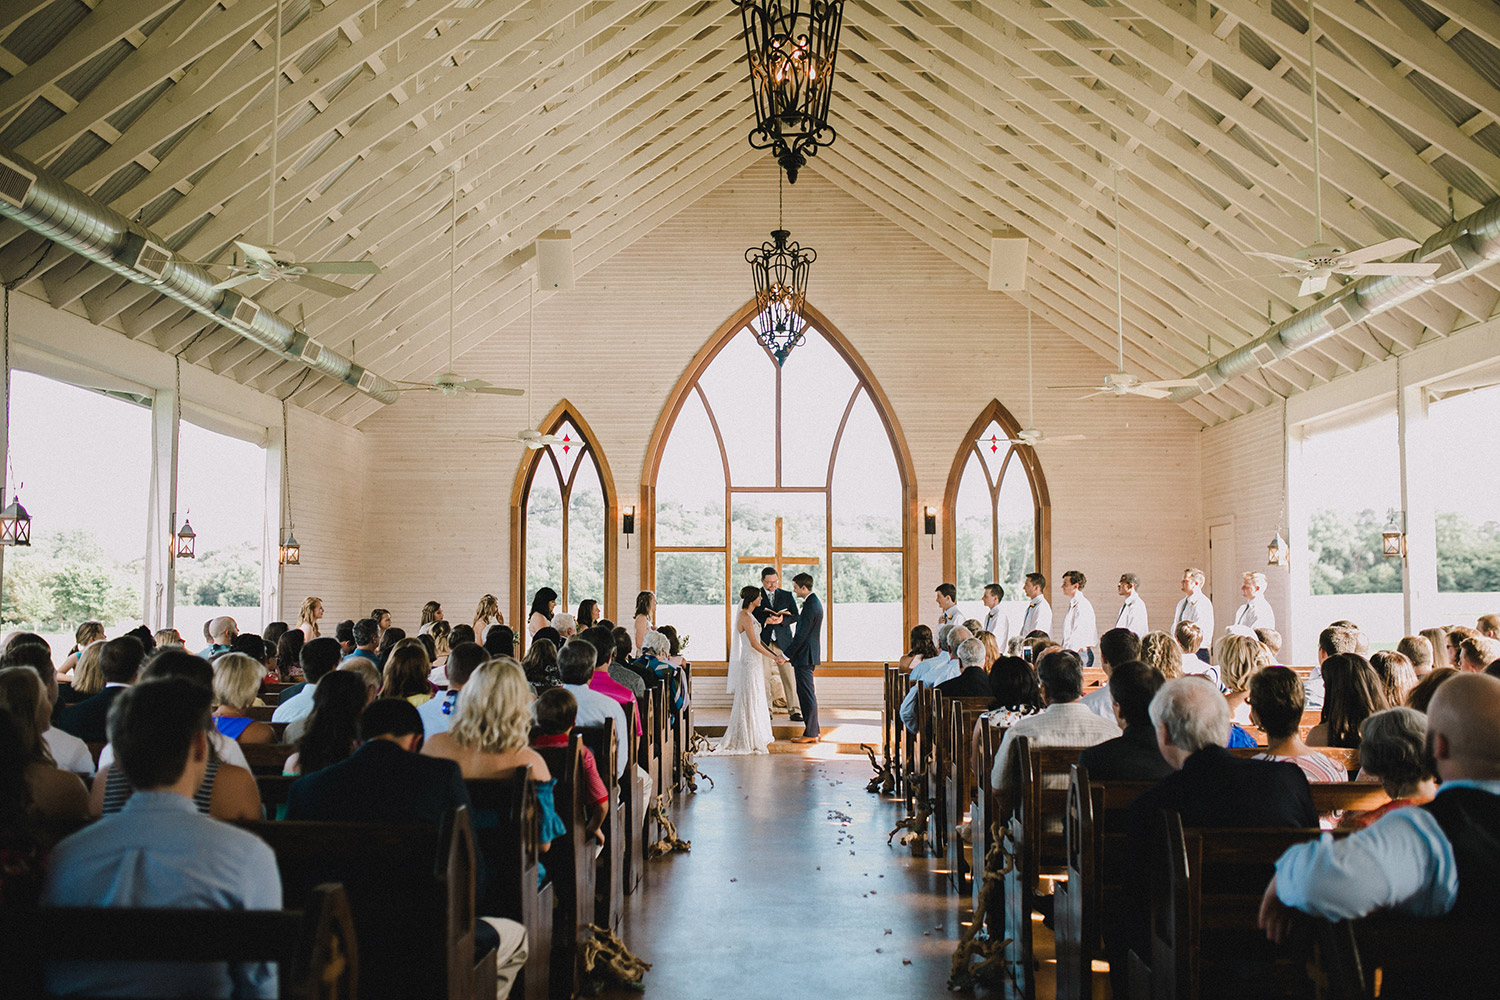 Brooks at Weatherford ceremony in White country chapel with gothic windows